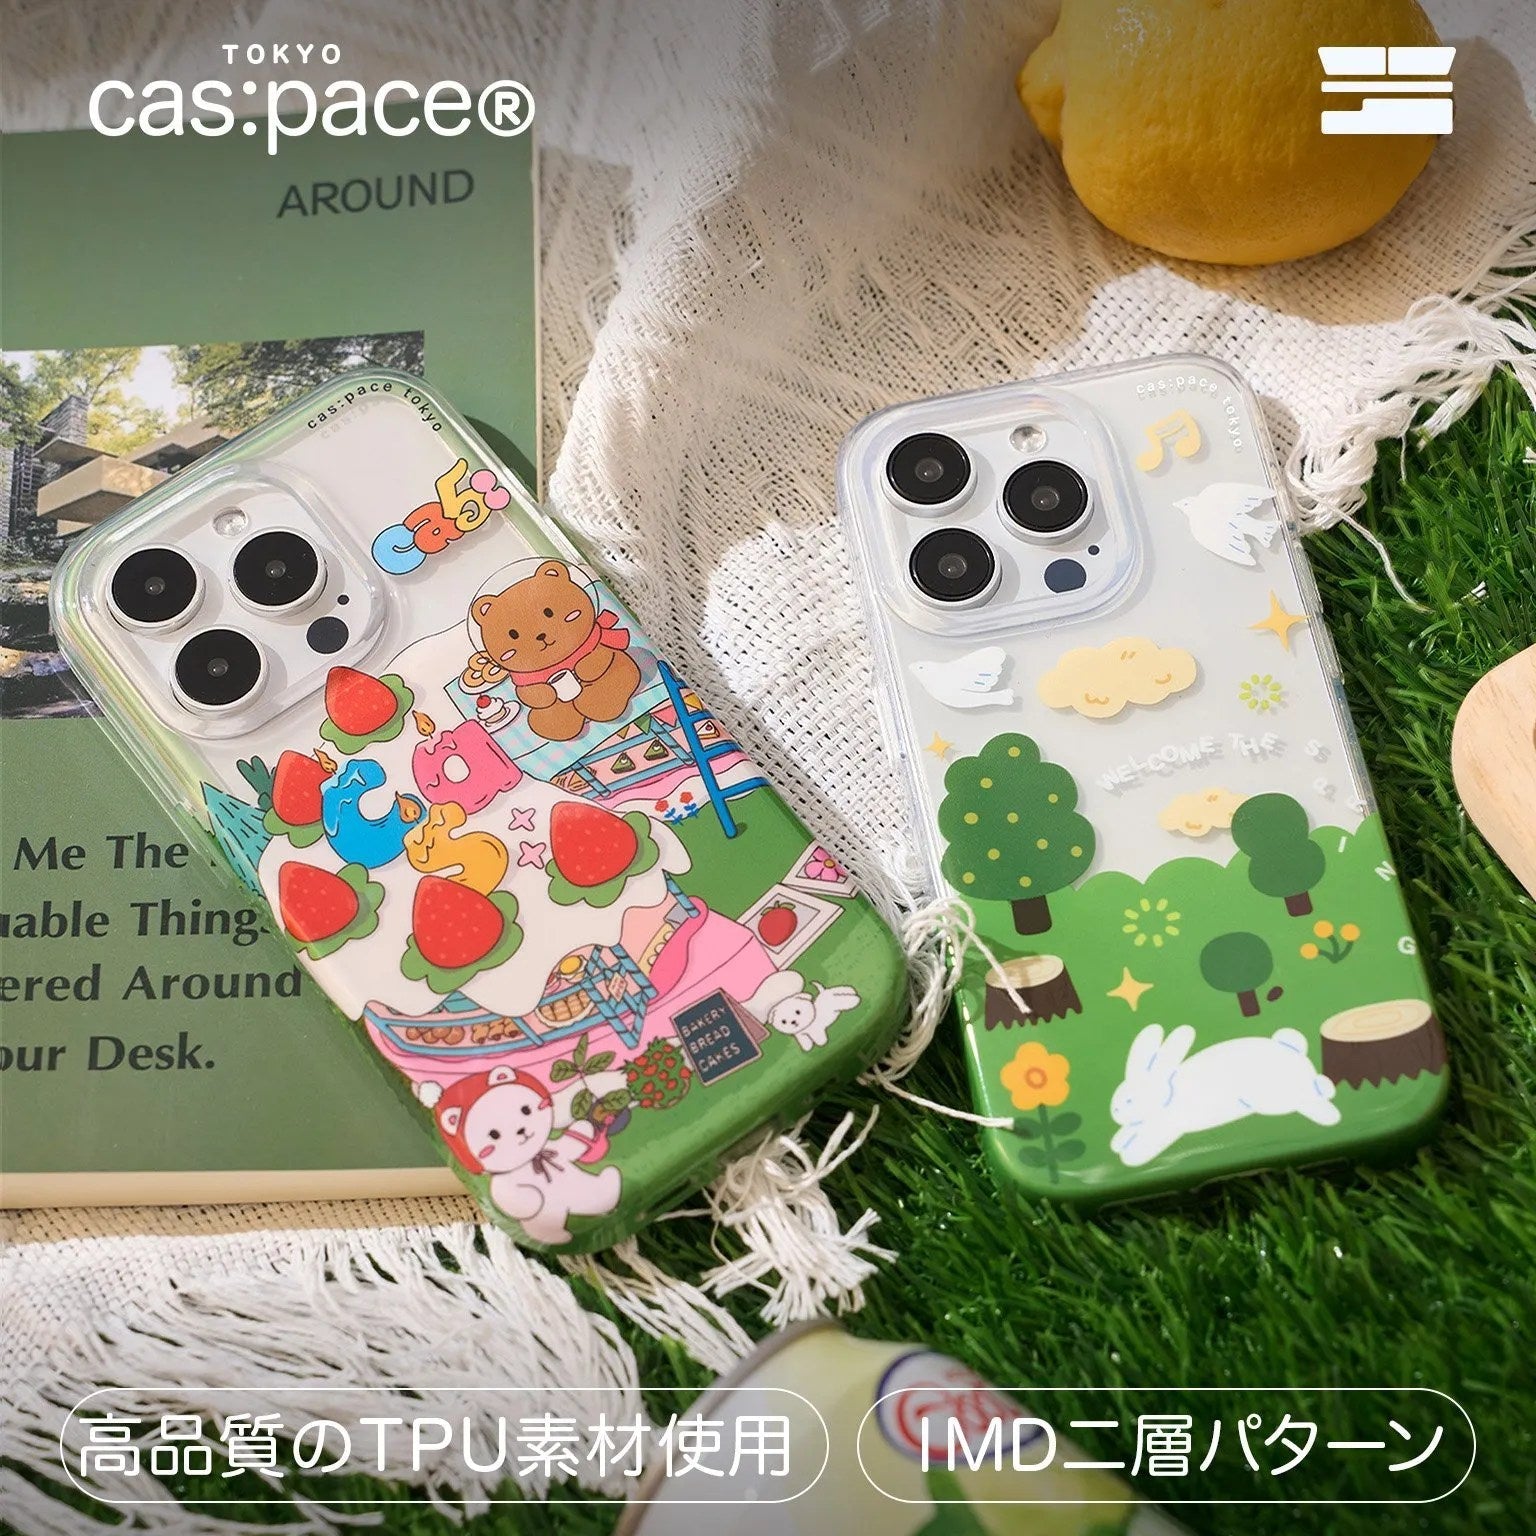 cas:pace 24S/S「spring outing」携帯ケース - cas:pace 殼空間